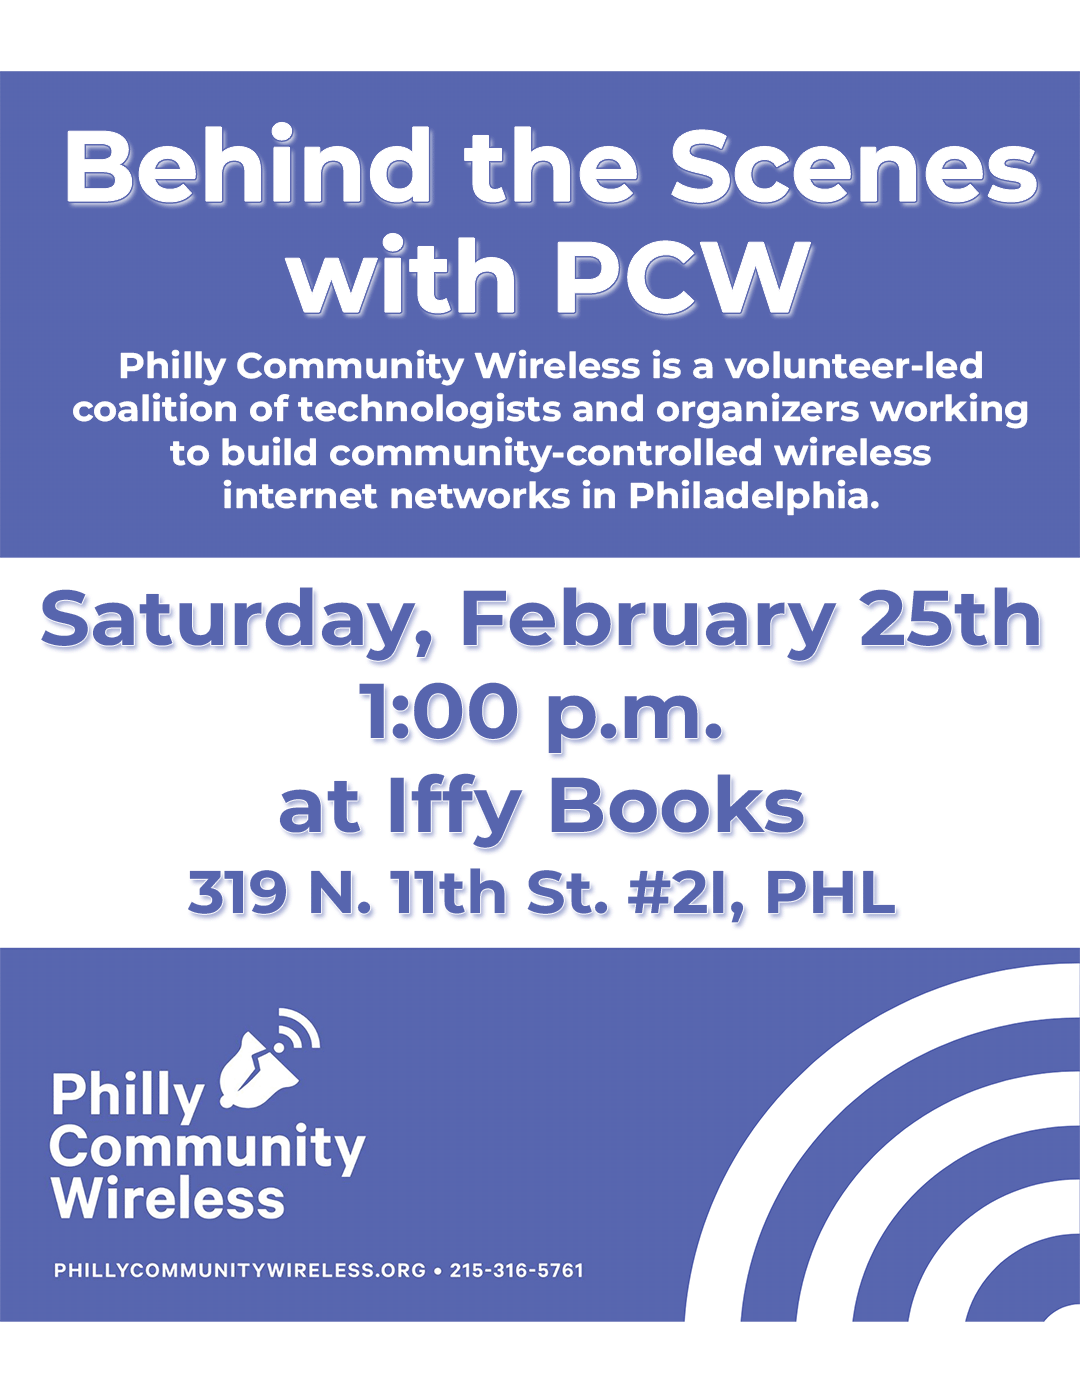 Flyer with the Philly Community Wireless logo (a cracked bell with a wi-fi logo) in the bottom left corner, with the following text: Behind the Scenes with PCW / Philly Community Wireless is a volunteer-led coalition of technologists and organizers working to build community-controlled wireless internet networks in Philadelphia. / Saturday, February 25th / 1:00 p.m. / at Iffy Books / 319 N. 11th St. #2I, PHL / Philly Community Wireless / phillycommunitywireless.org • 215-316-5761